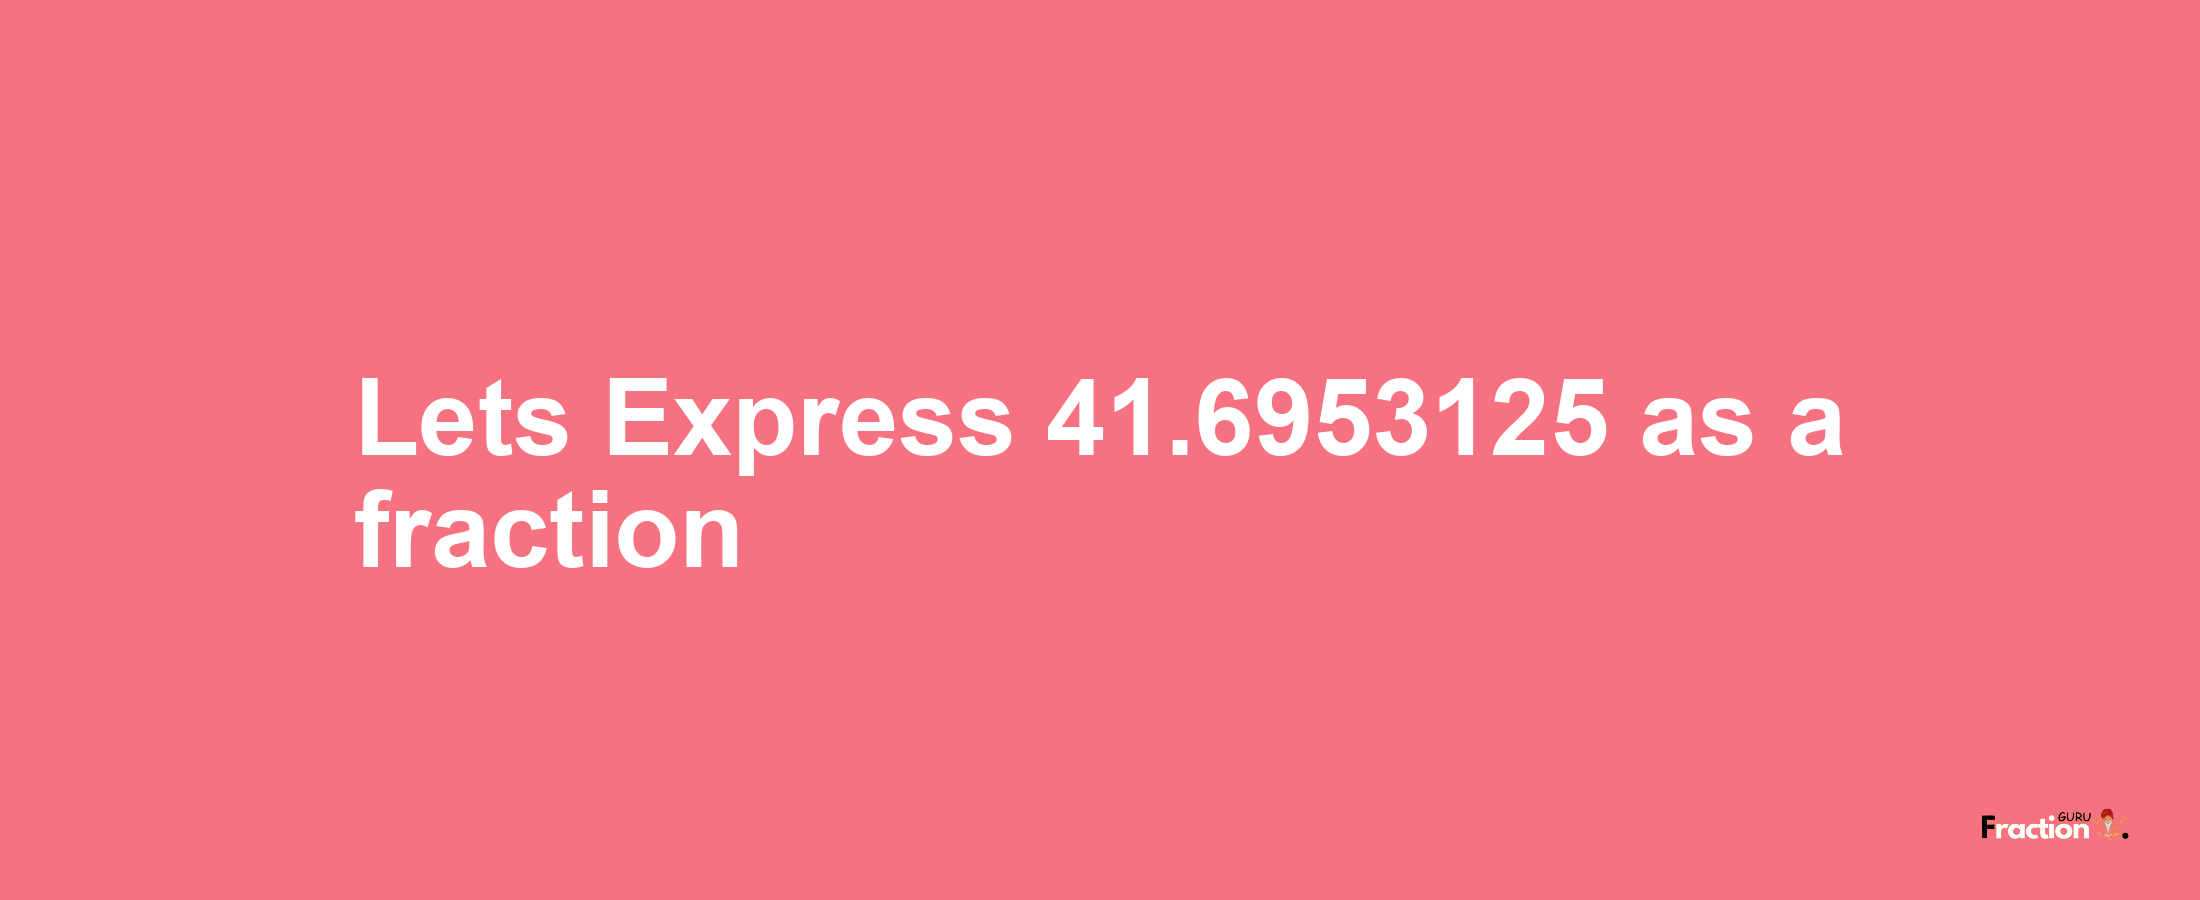 Lets Express 41.6953125 as afraction